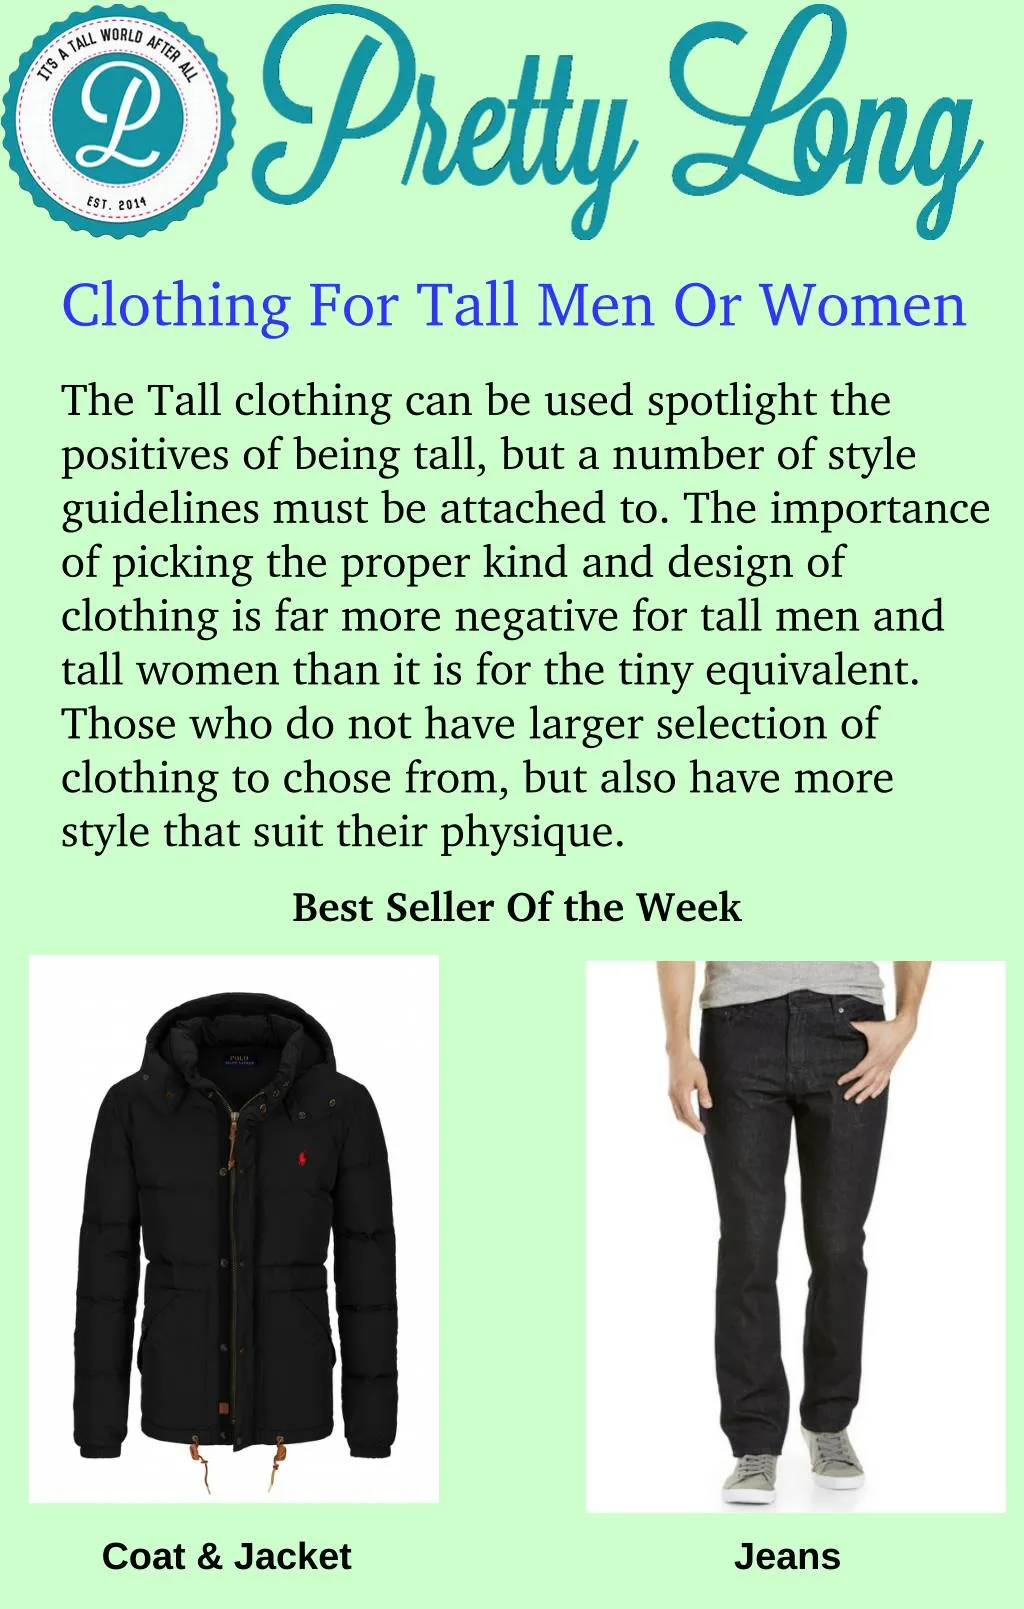 clothing for tall men or women